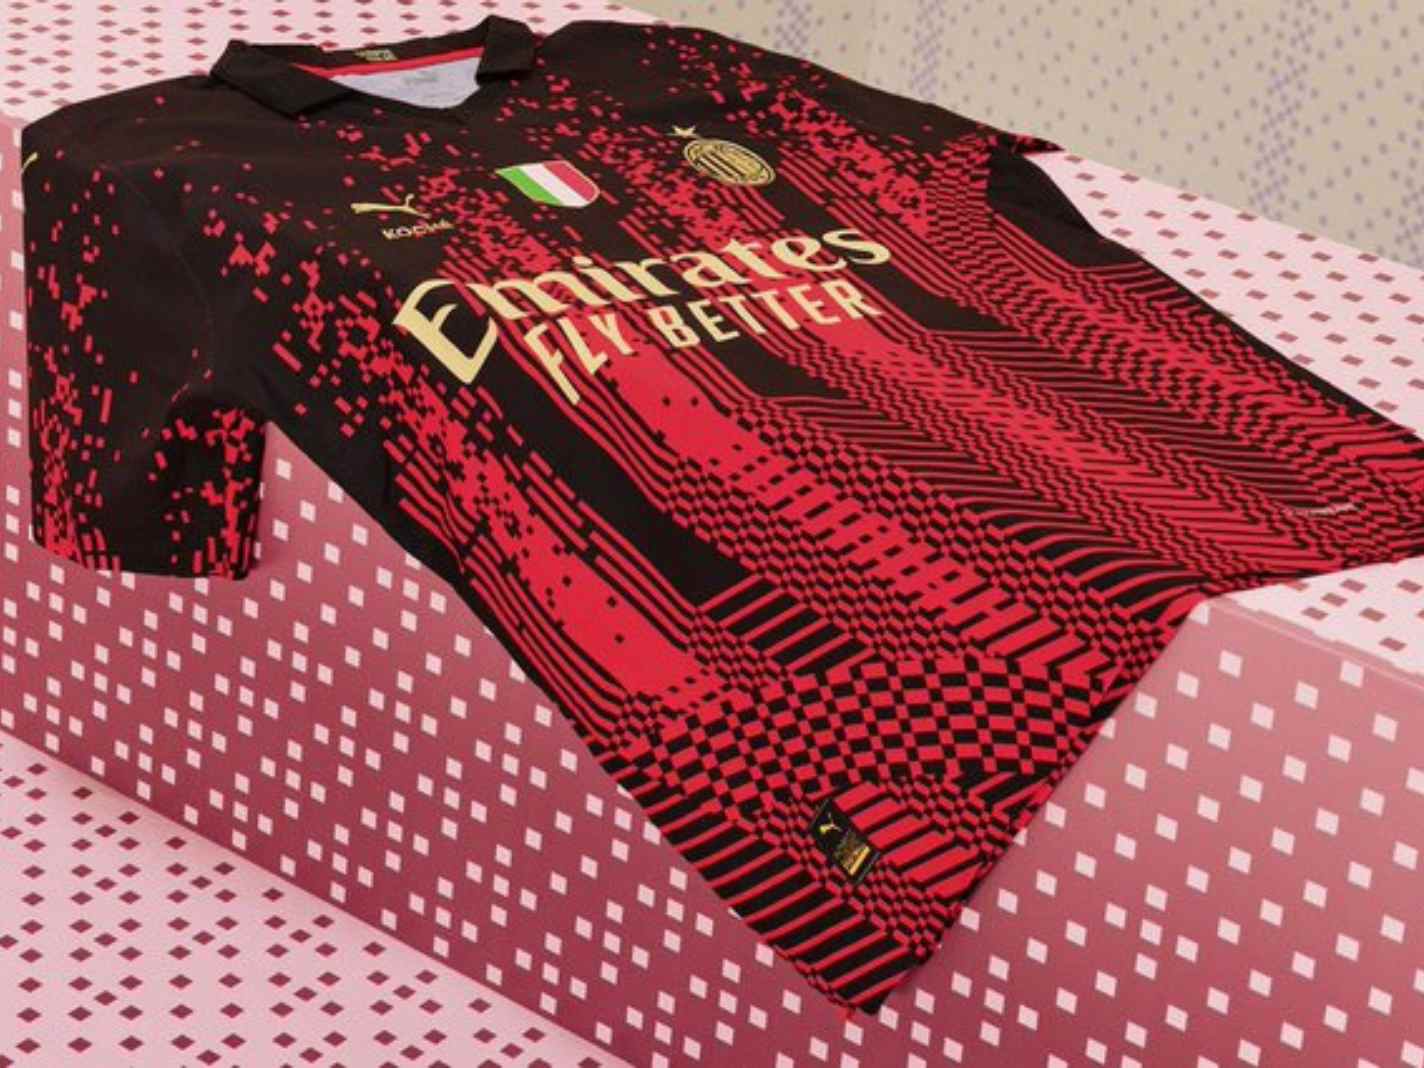 New AC Milan x Koche 4th kit from Puma appears to have a Solitaire twist